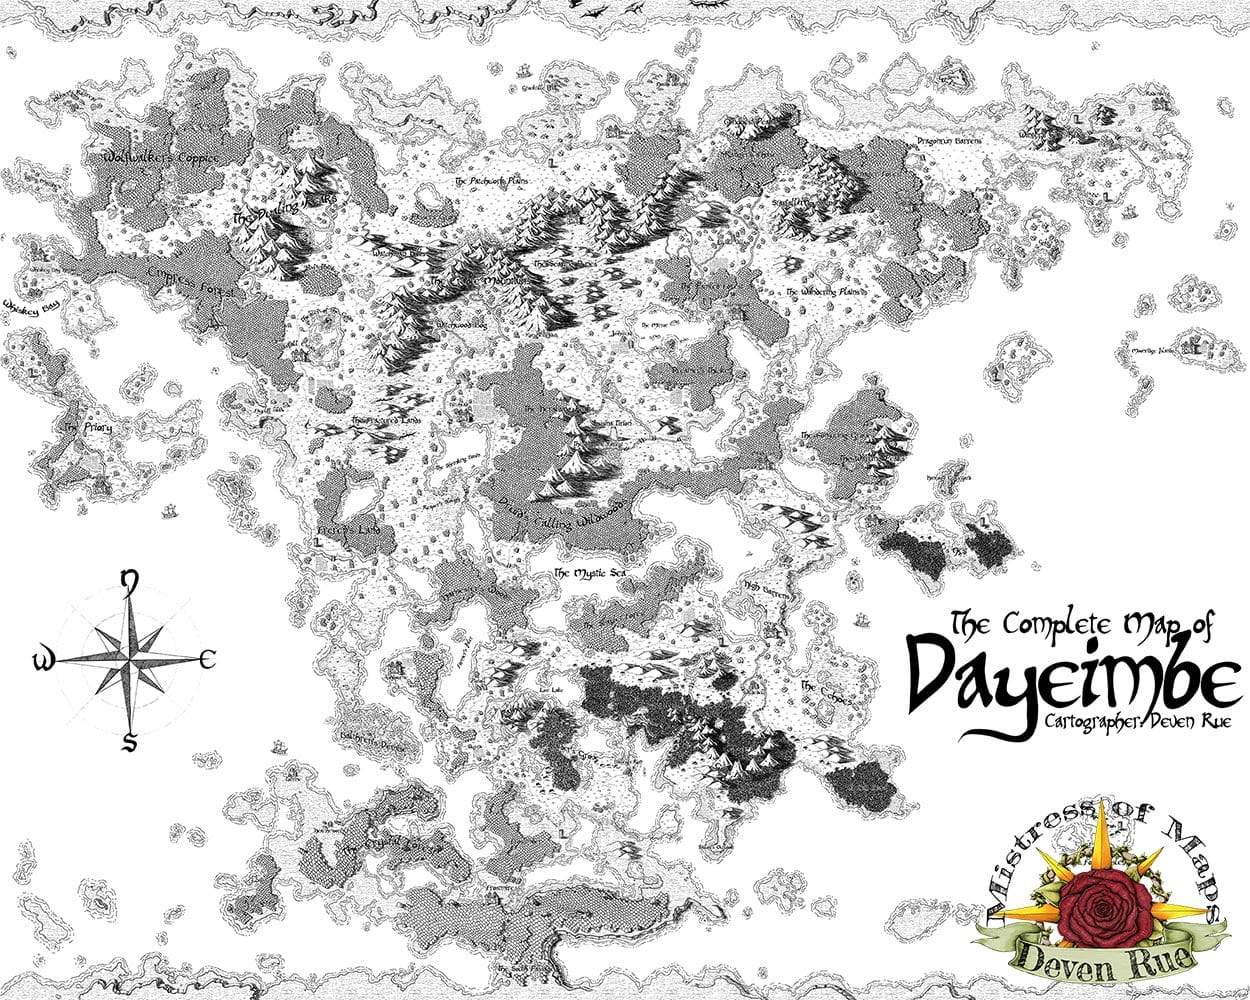 Dayeimbe Printed Map Prop Maps with text Deven Rue